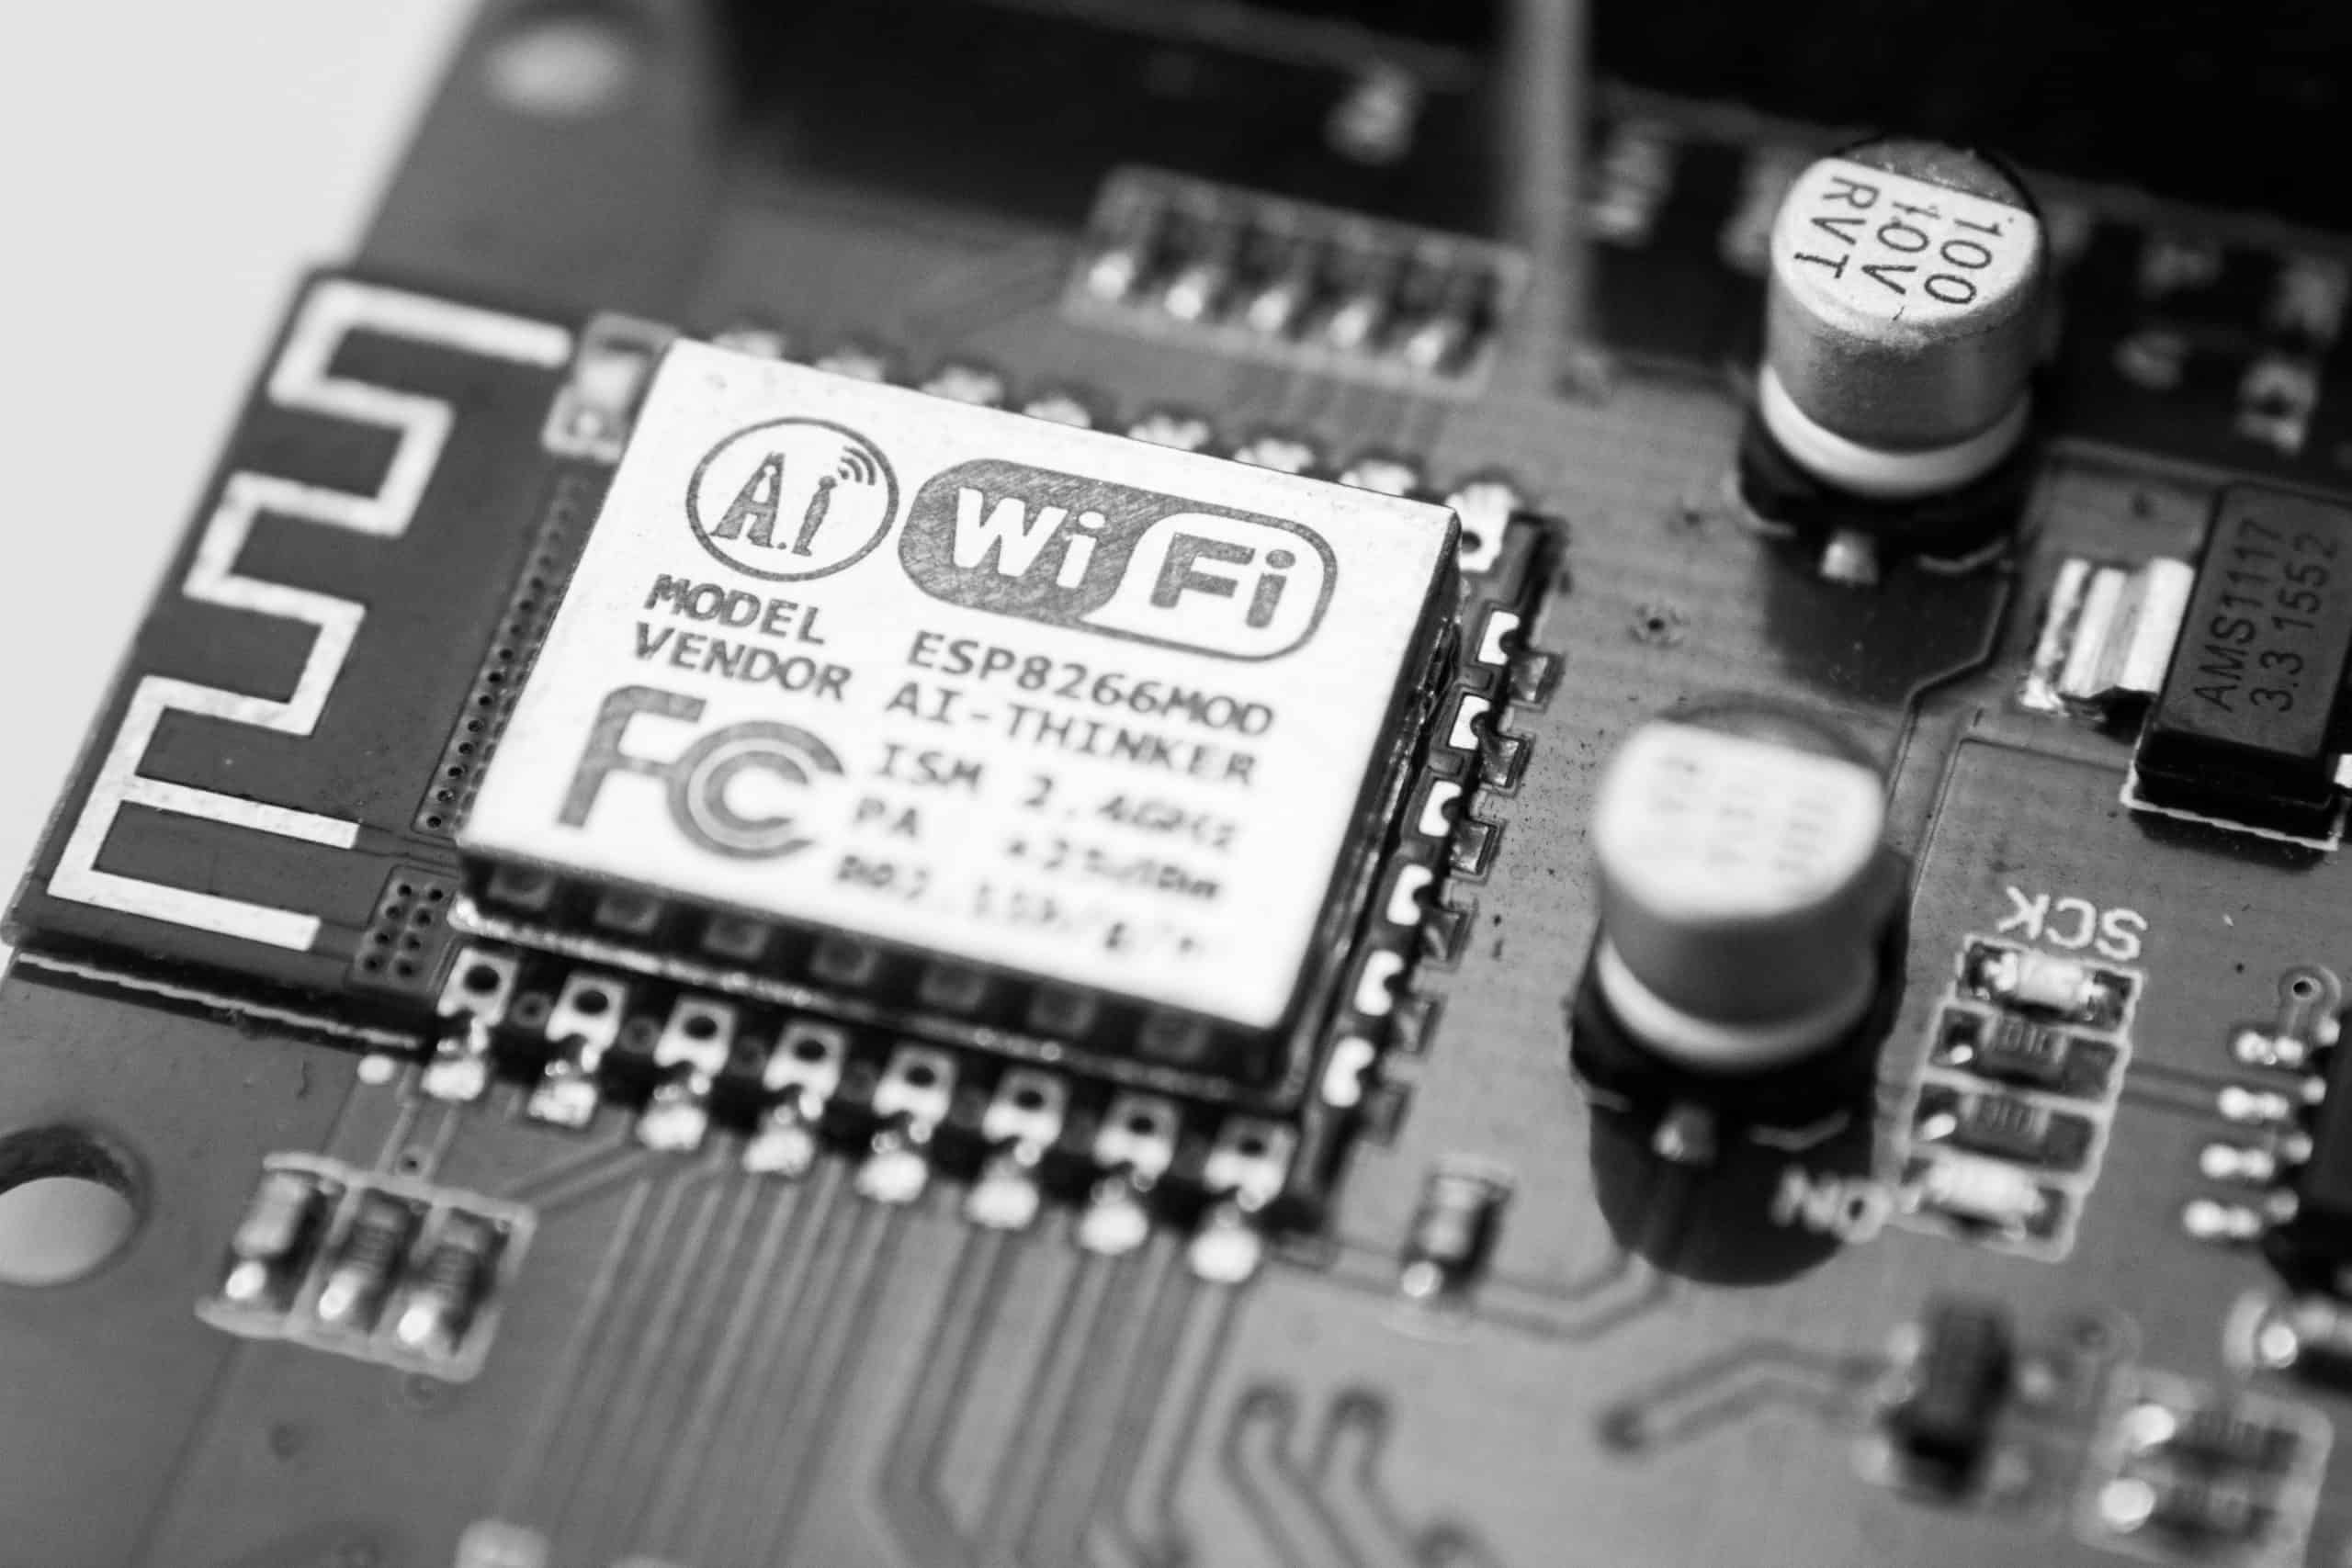 Wifi chip on a PCB componant board